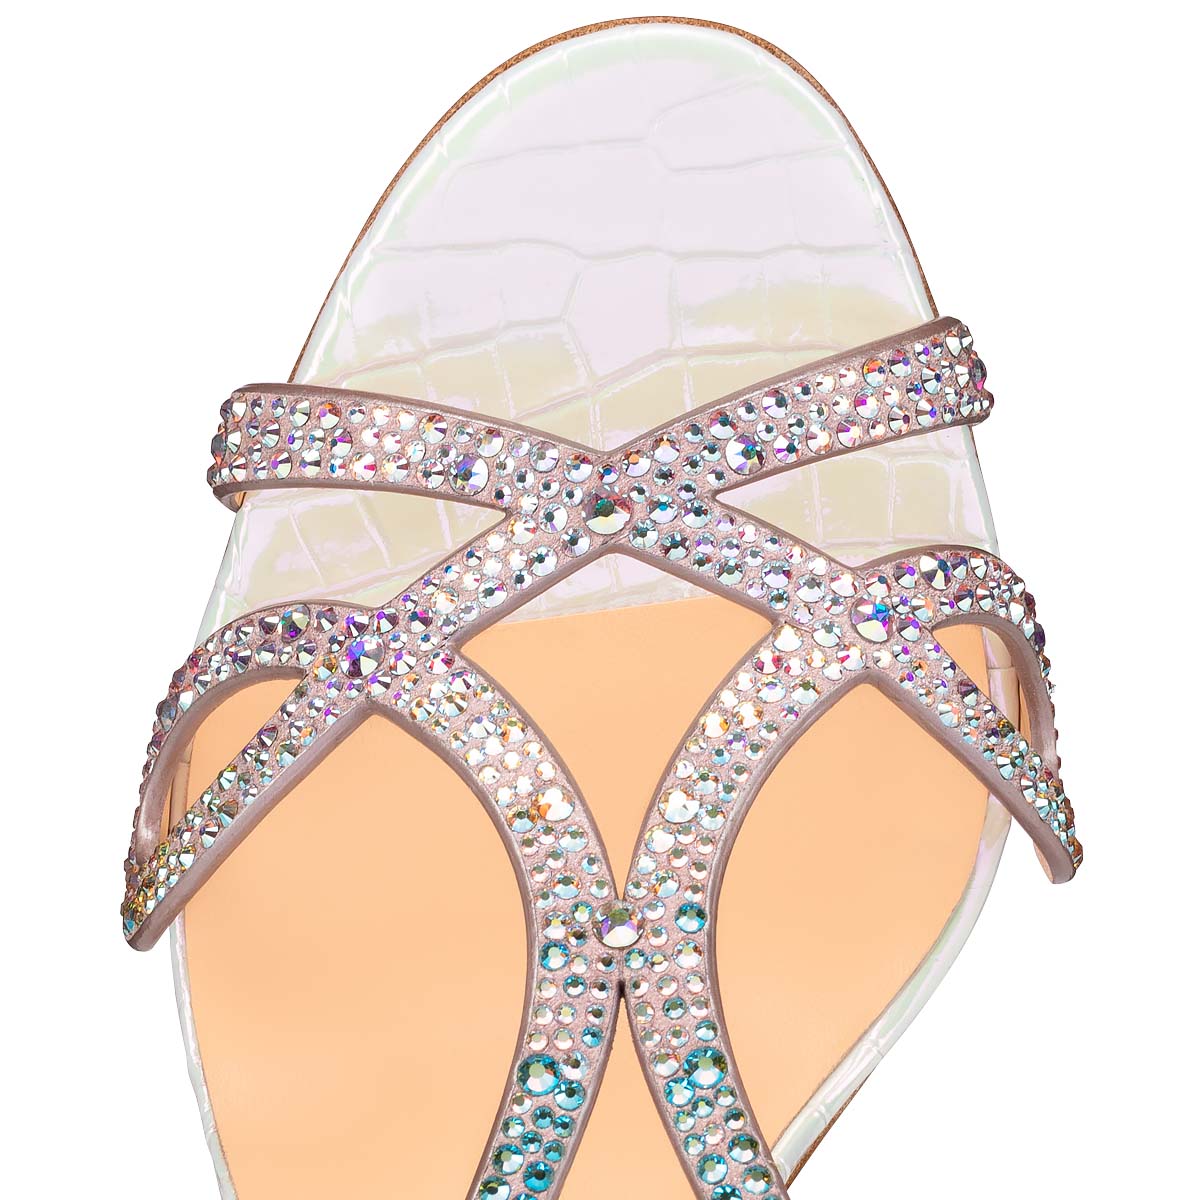 DOUBLE L SANDAL STRASS 100 MULTI/WHITE SUEDE - Shoes - Women 